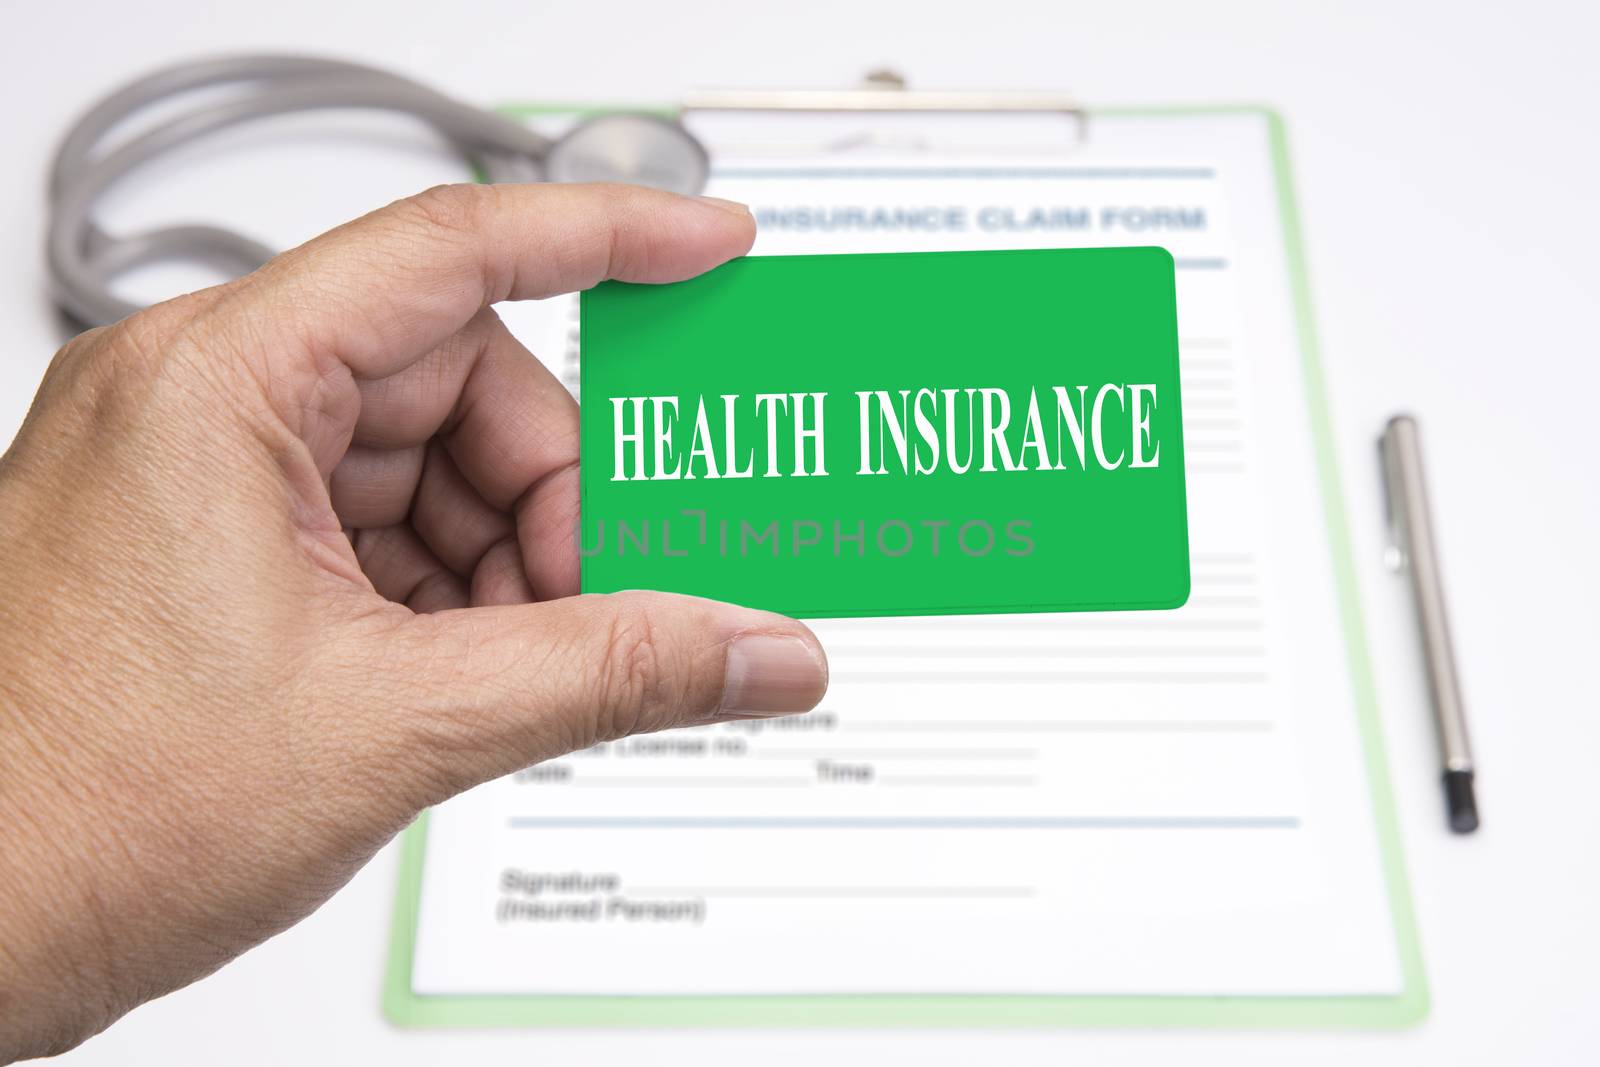 Health insurance card in hand. by pandpstock_002